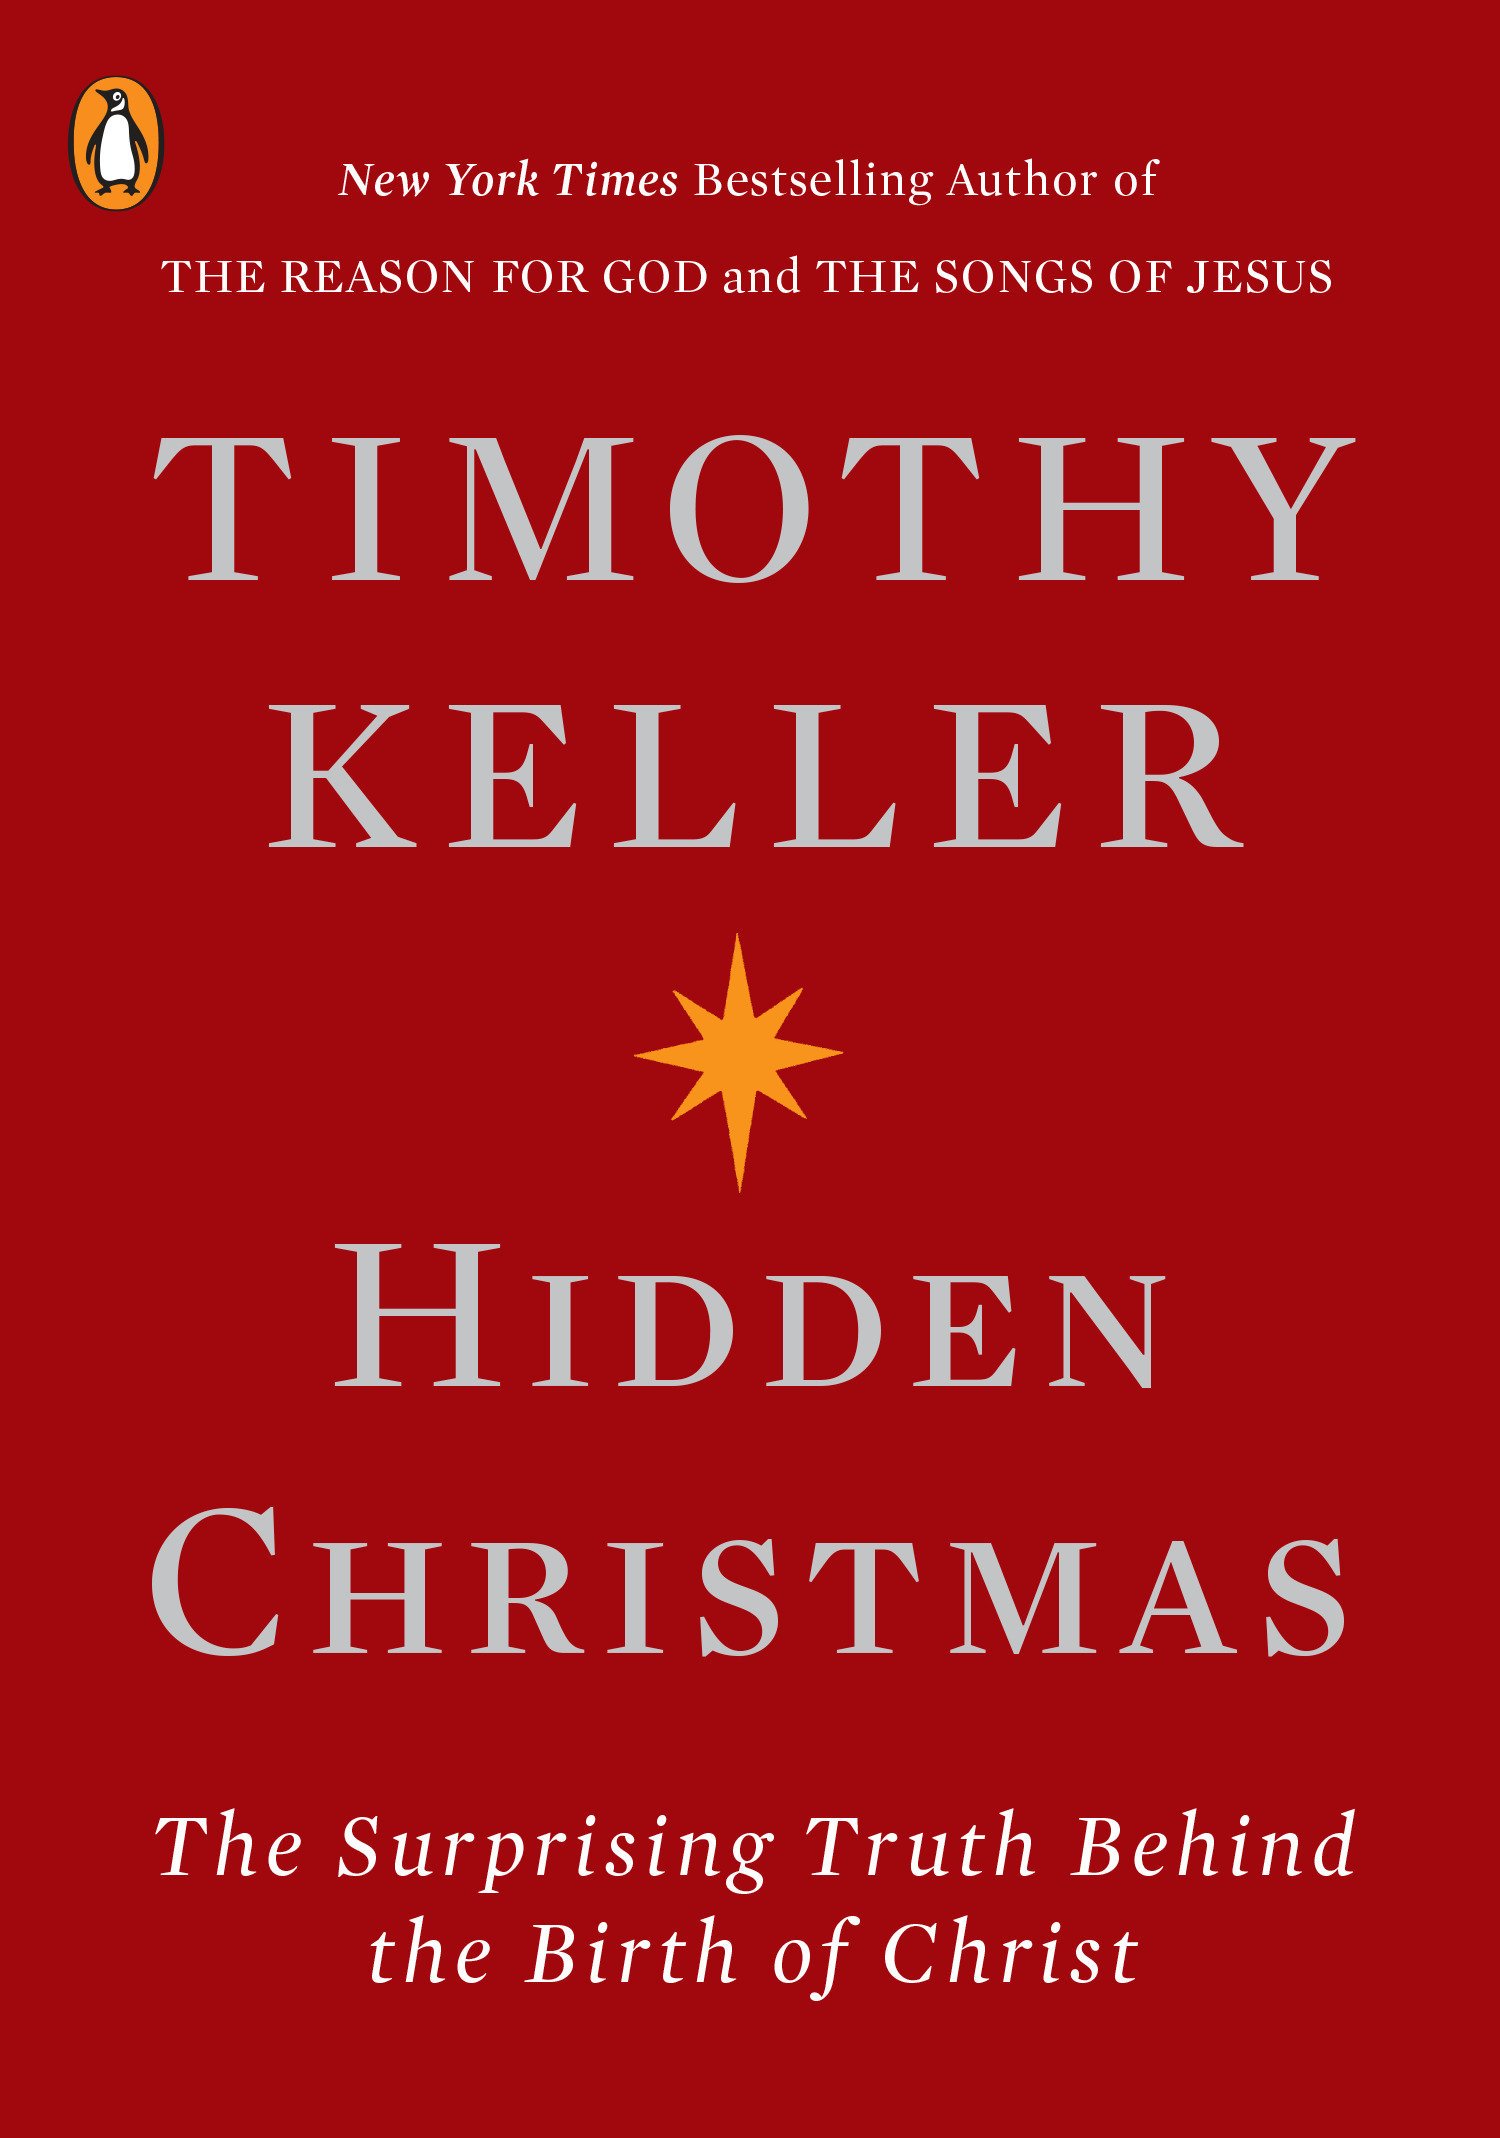 Hidden Christmas: The Surprising Truth Behind the Birth of Christ by Timothy Keller